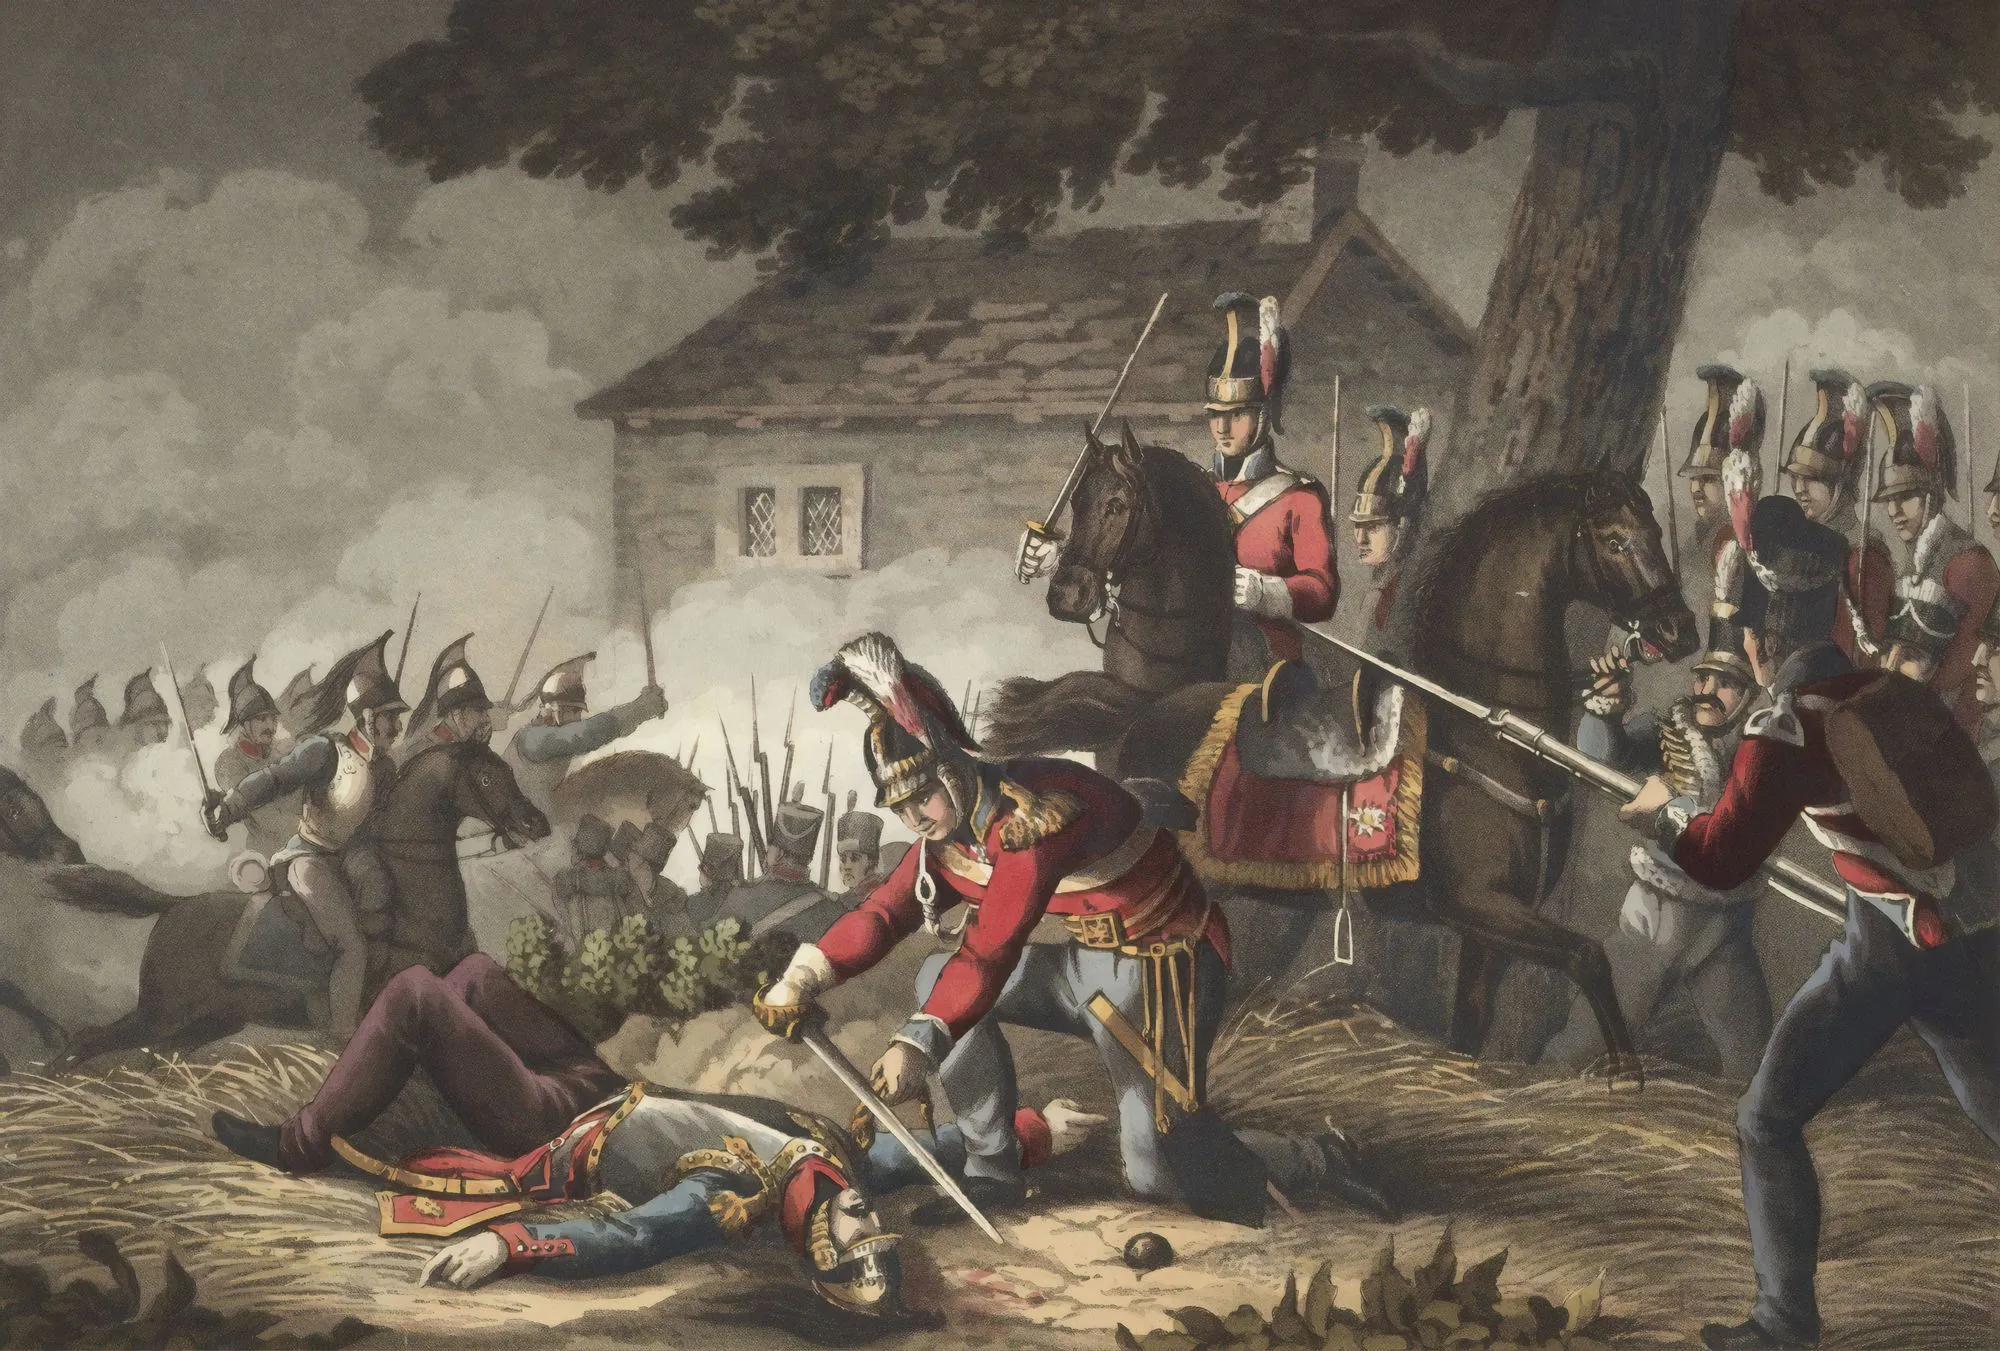 Searching for Battle of Waterloo facts? Read for more!